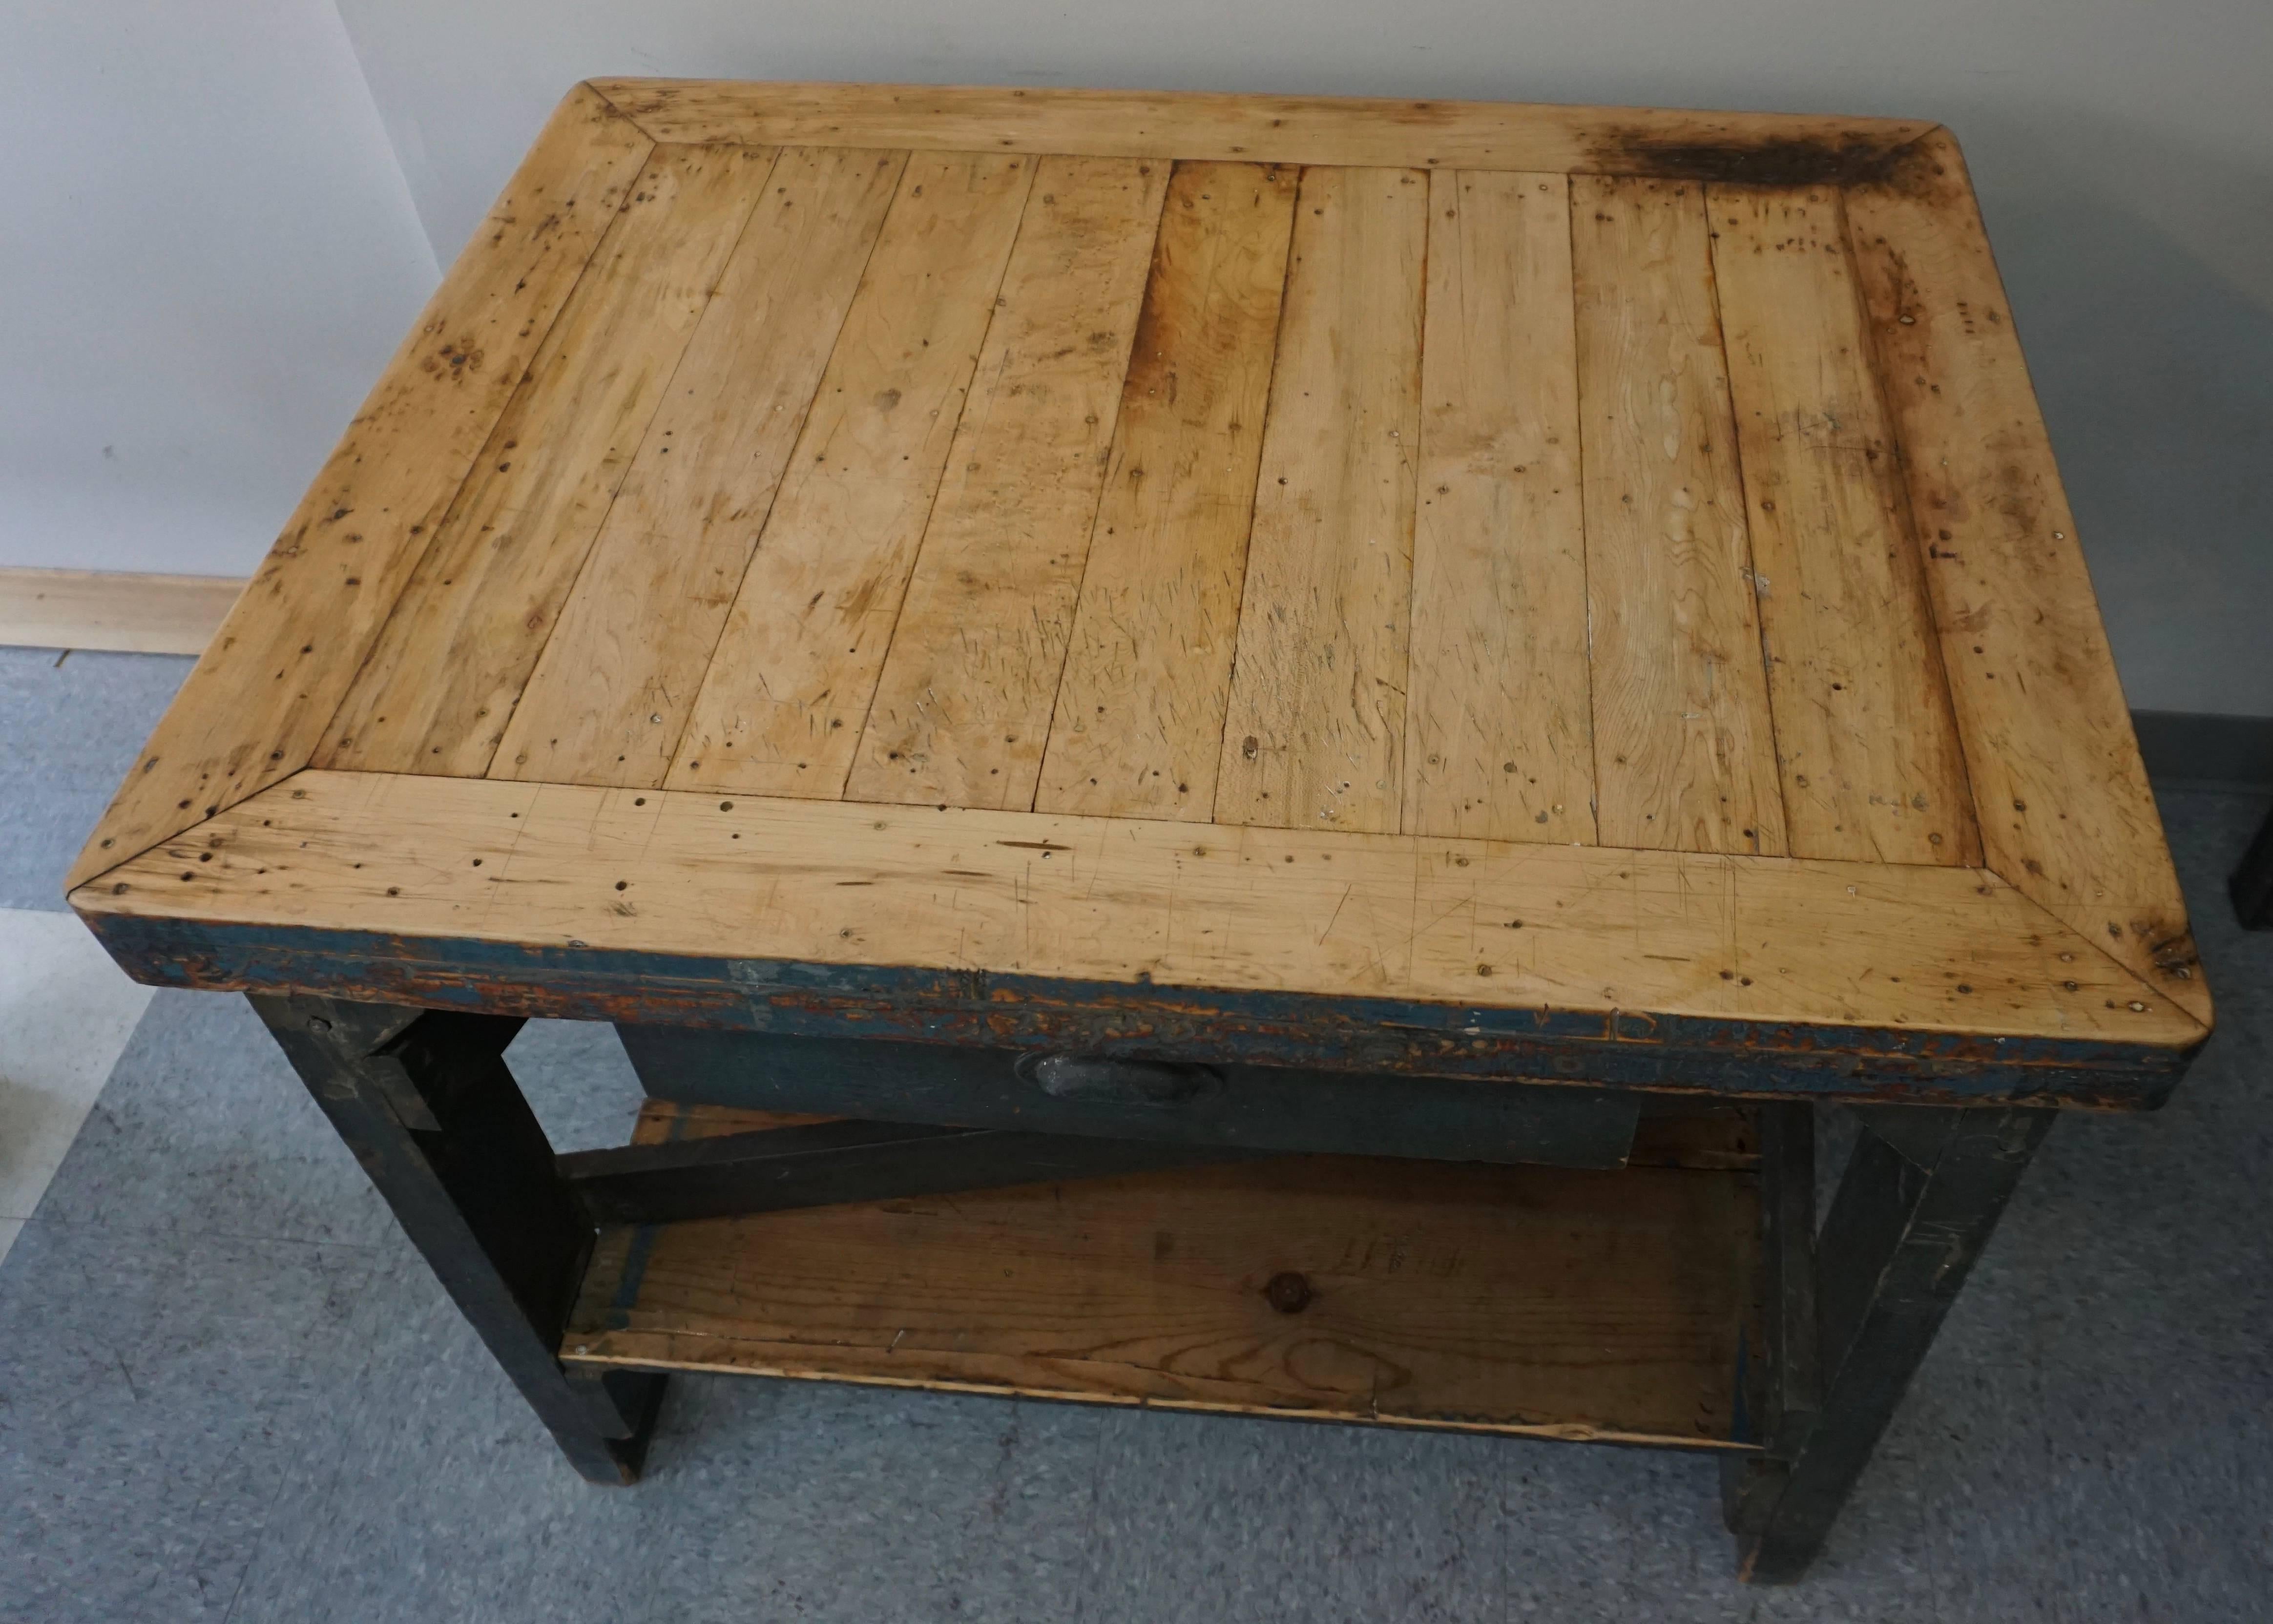 The top are solid maple boards that have wear and age appropriate for the vintage. The base has unusual supports and one drawer. Would make a great kitchen island. The base has original dark blue paint.